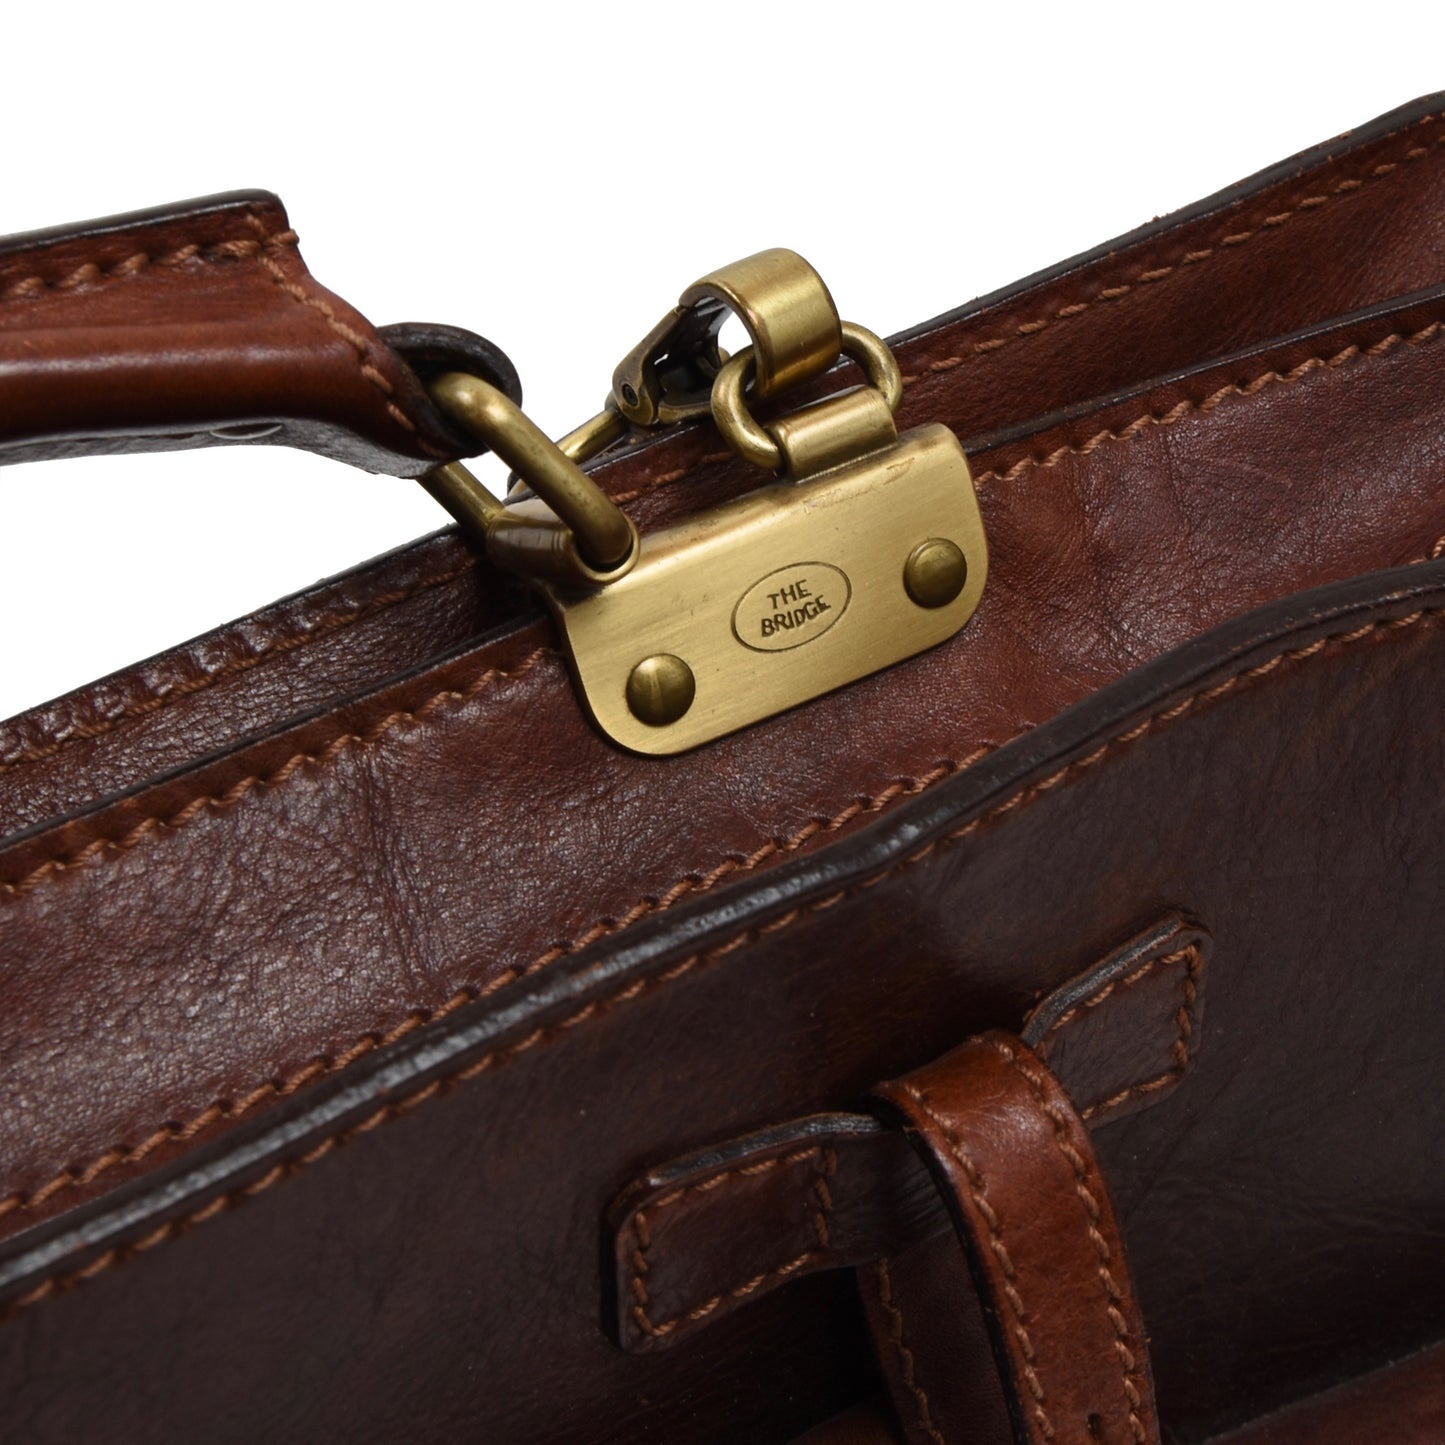 The Bridge Firenze Leather Bag "The Story" - Brown